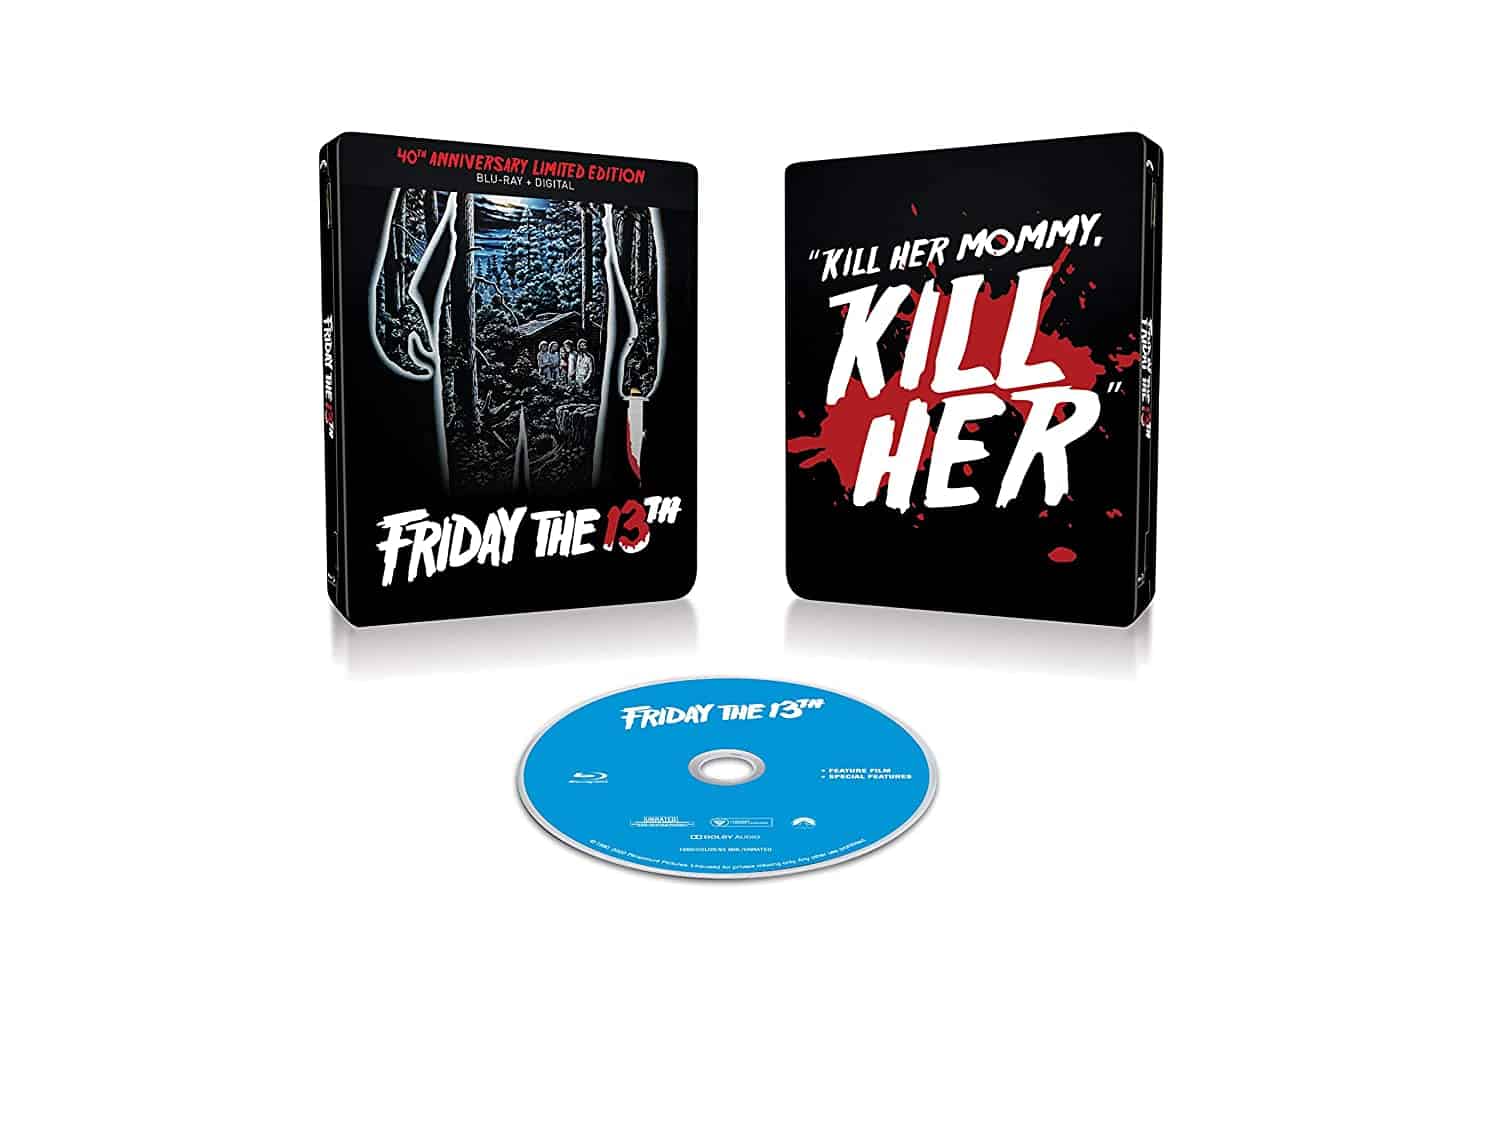 Friday the 13th Part 3 gets a steelbook, while Friday the 13th goes 4K UHD! 18